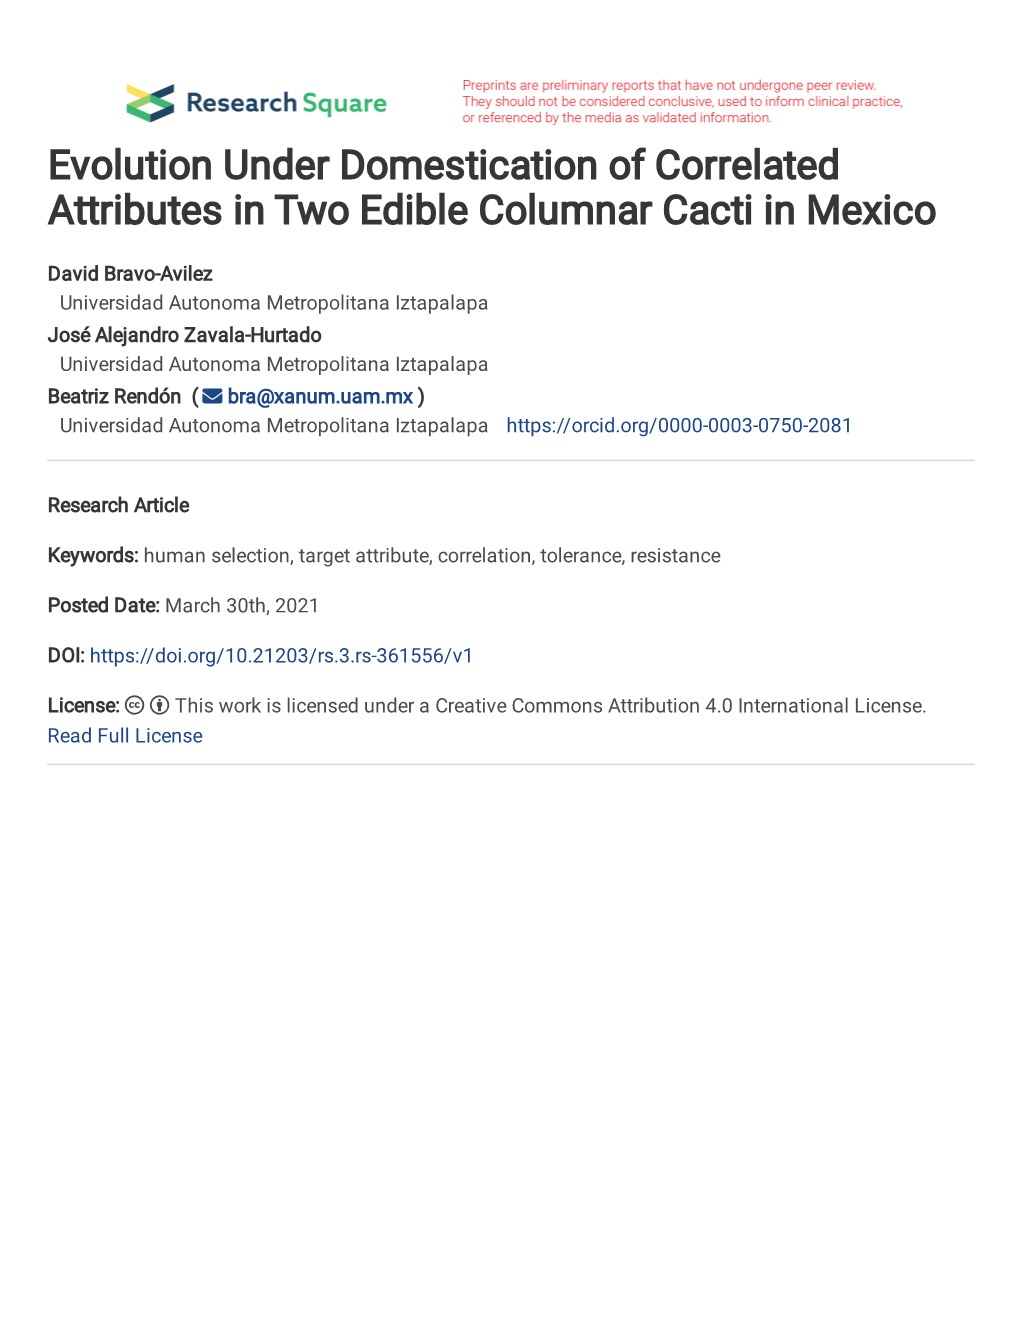 Evolution Under Domestication of Correlated Attributes in Two Edible Columnar Cacti in Mexico